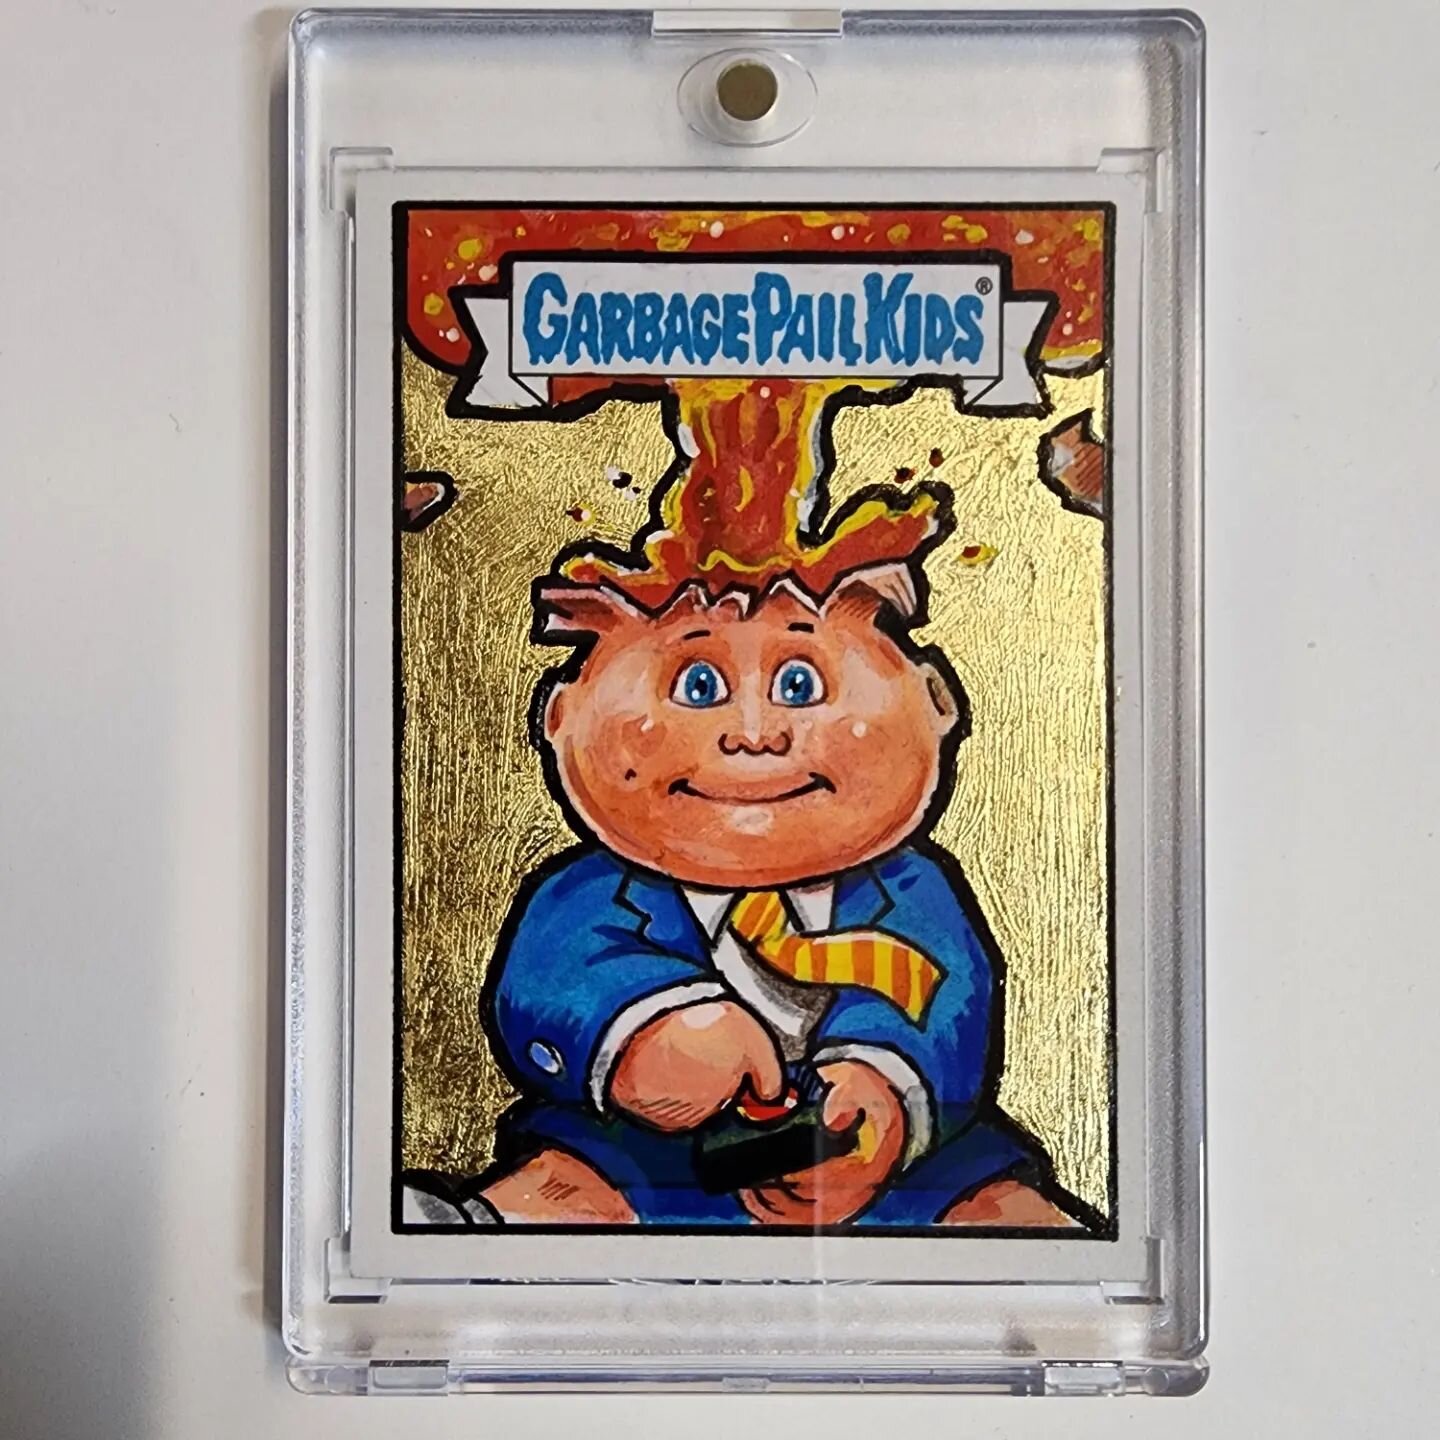 Gooooold! This GPK sketch card has a hand applied and varnished gold leaf background and is available now for bidding on Da' Bay Starting at 99c !! Now I can rest my eyes for a little!

#garbagepailkids #gpk #Sketch #sketchcard #tradingcards #topps #